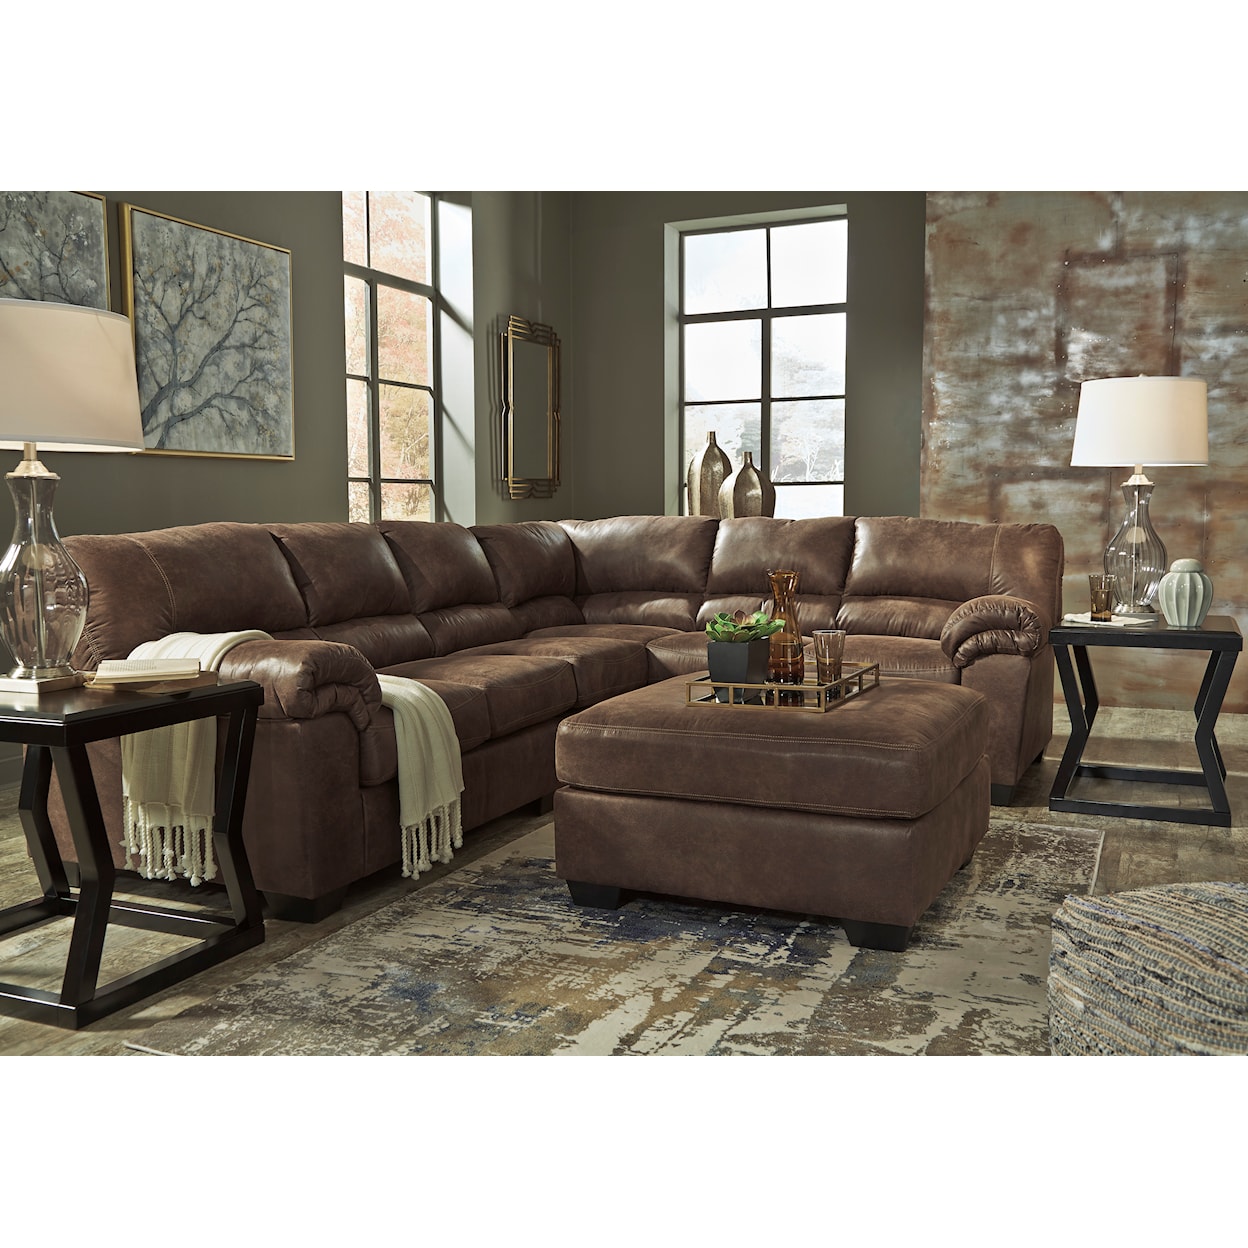 Signature Design Bladen 3-Piece Sectional with Ottoman